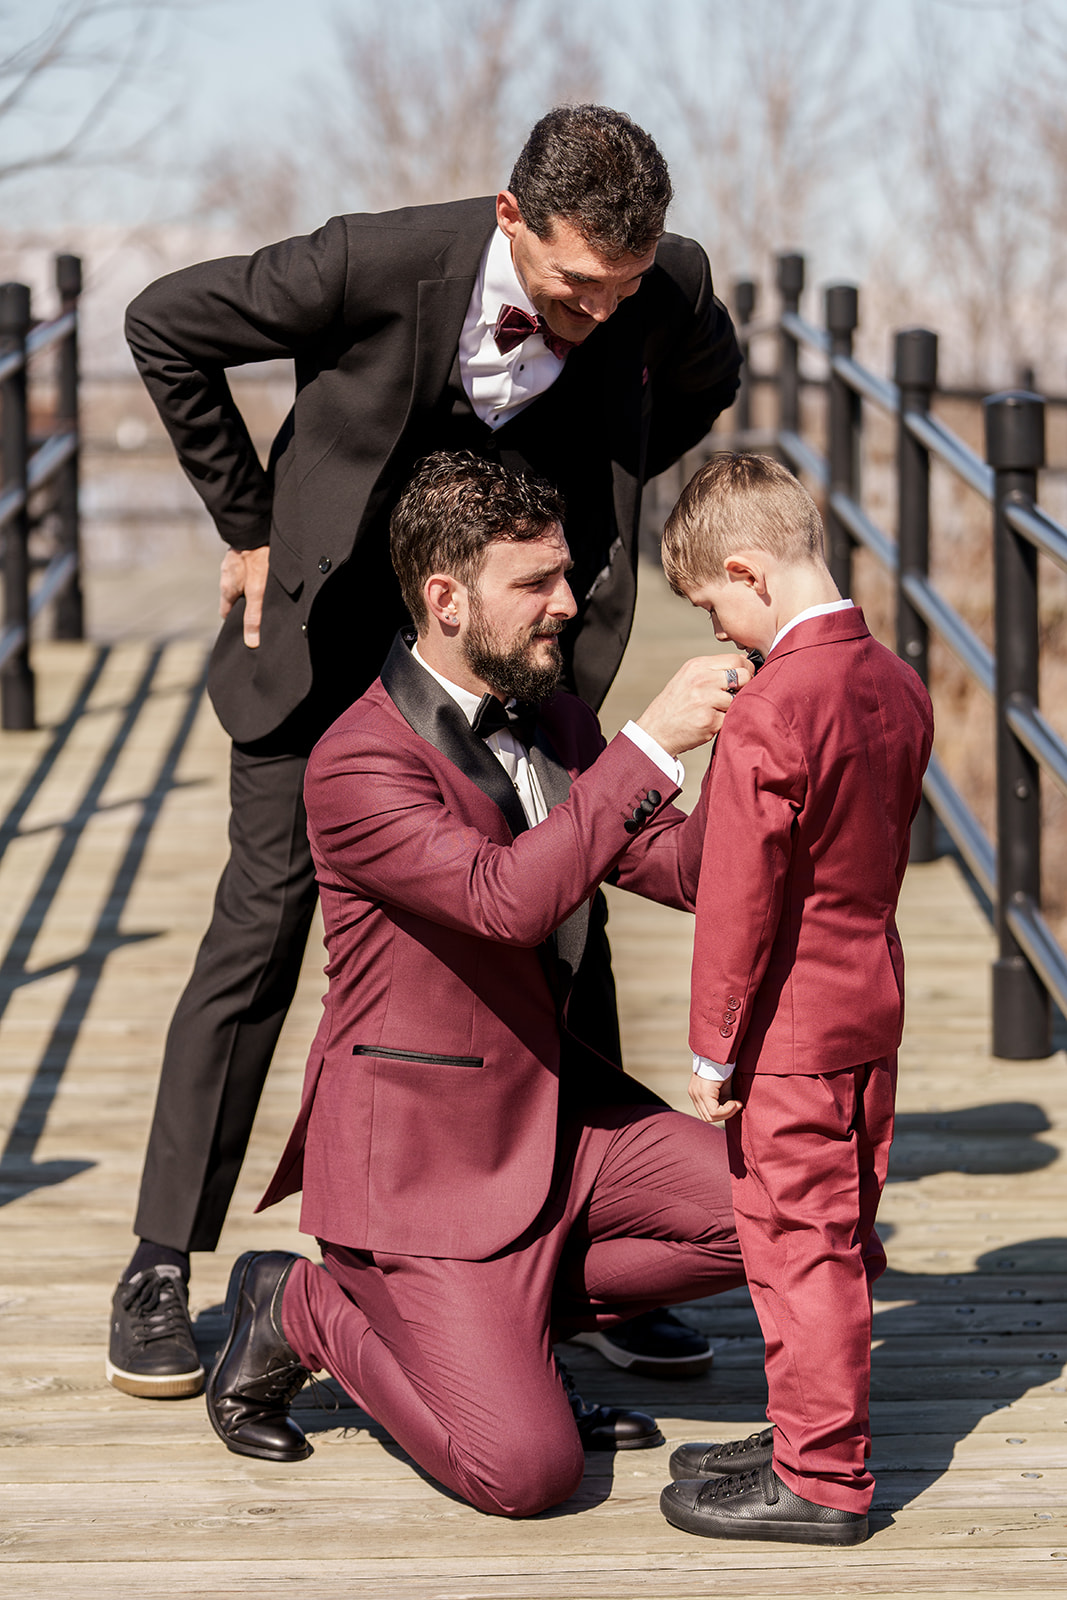 the groom getting his son ready, while the groom's father watches over them